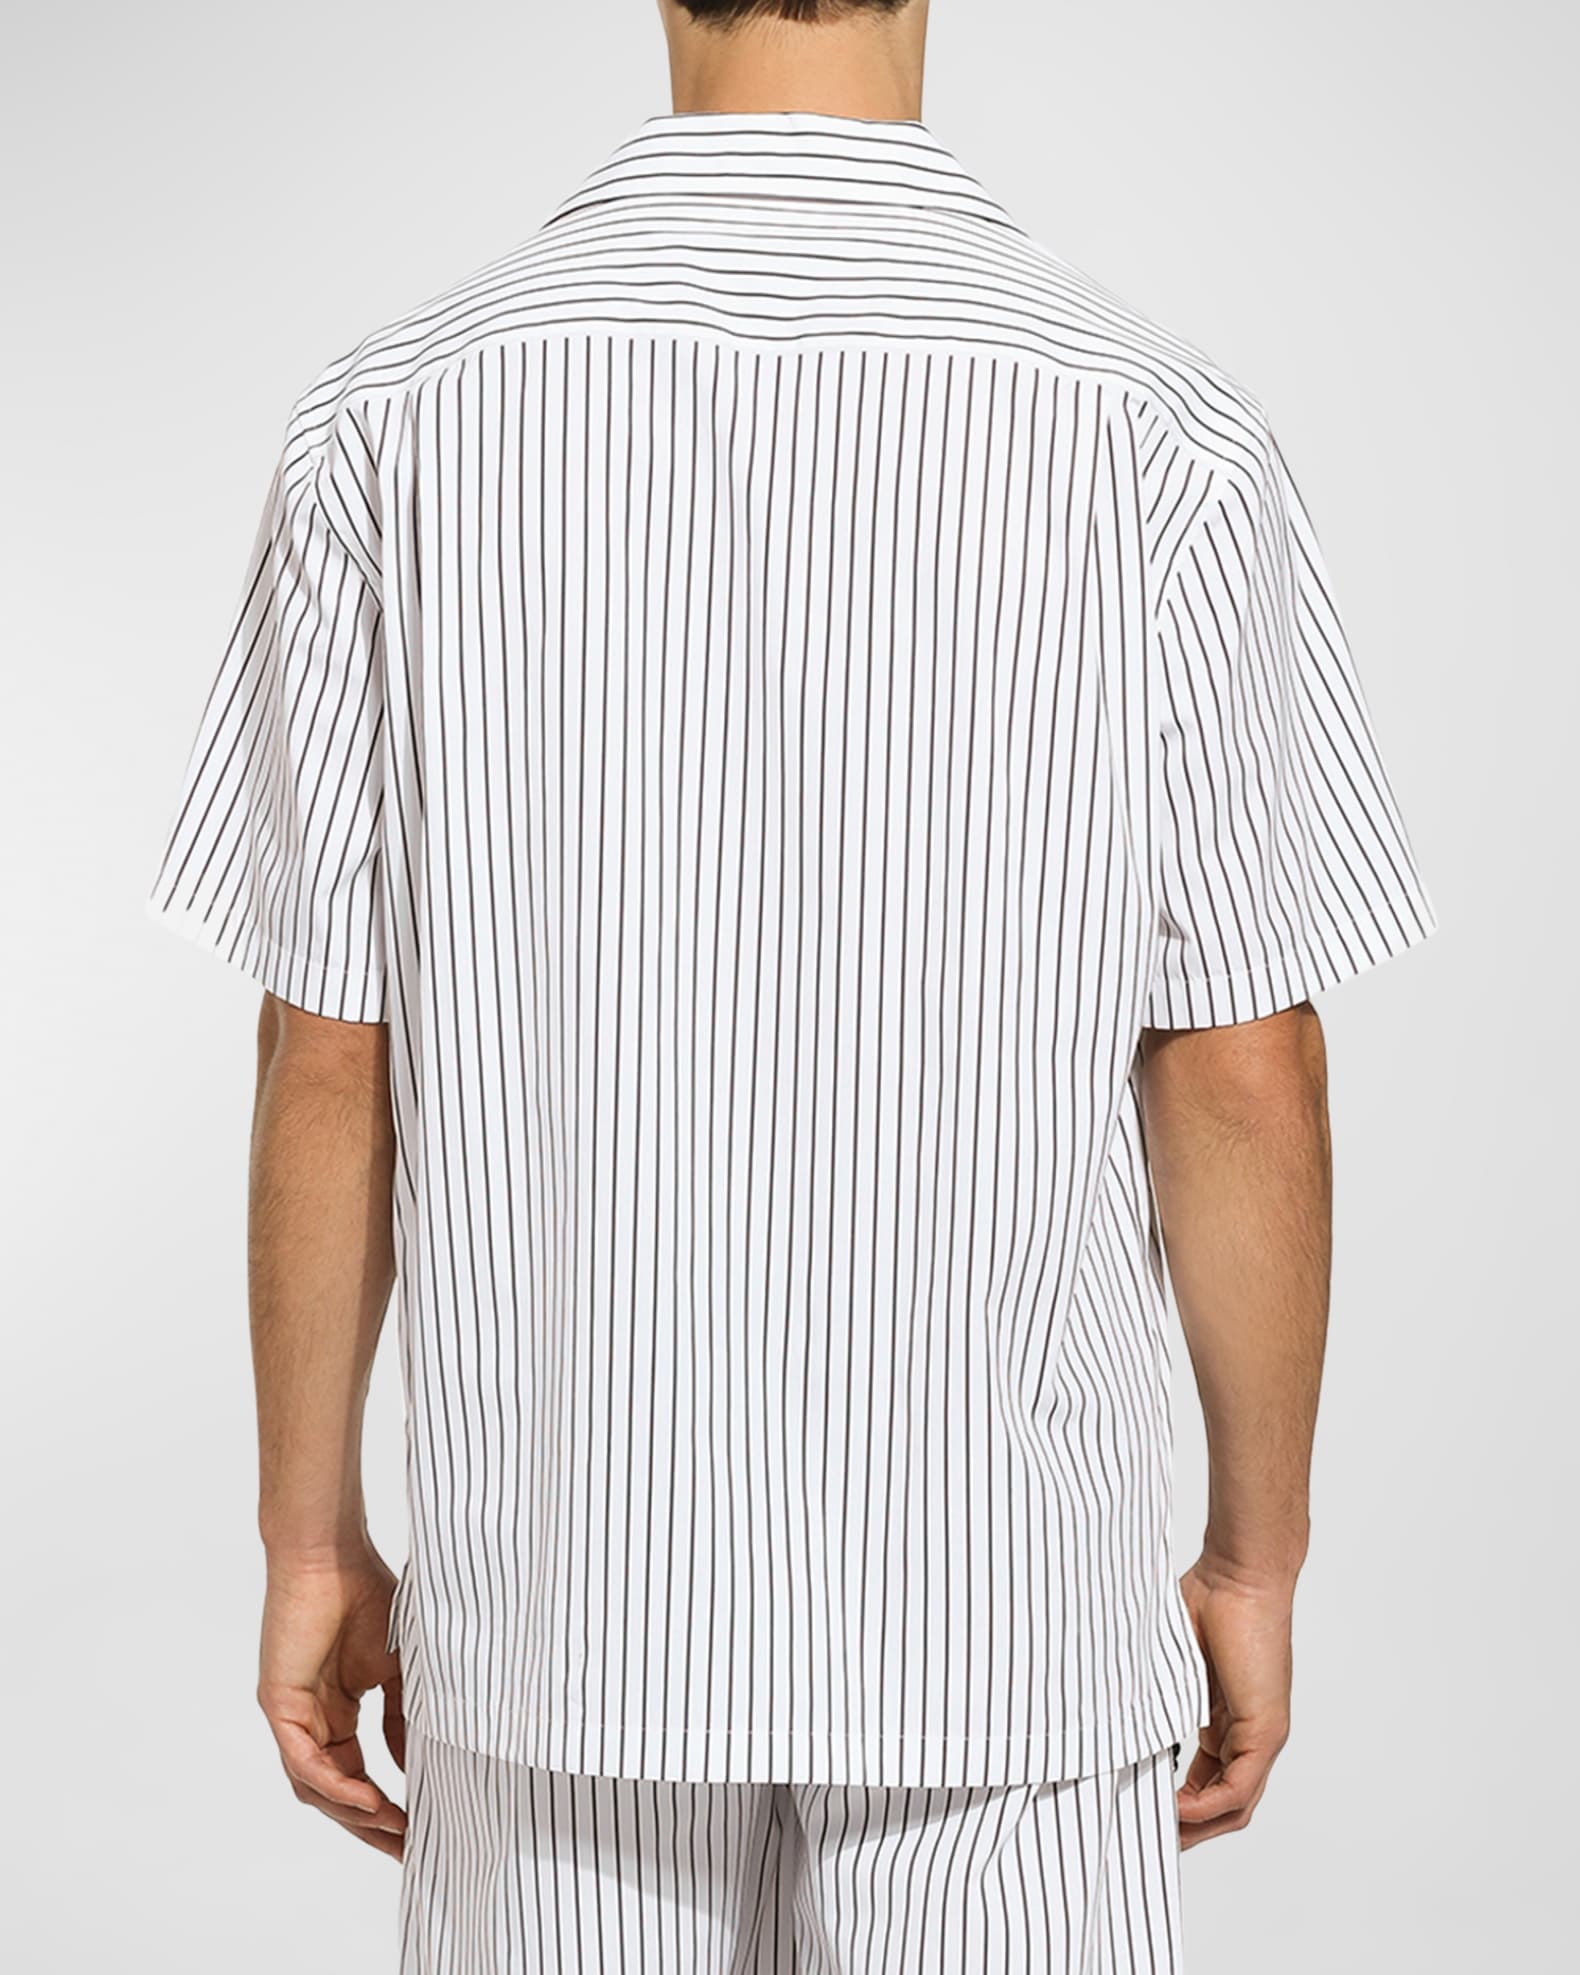 Dolce&Gabbana Men's Striped Floral Embroidery Camp Shirt | Neiman Marcus